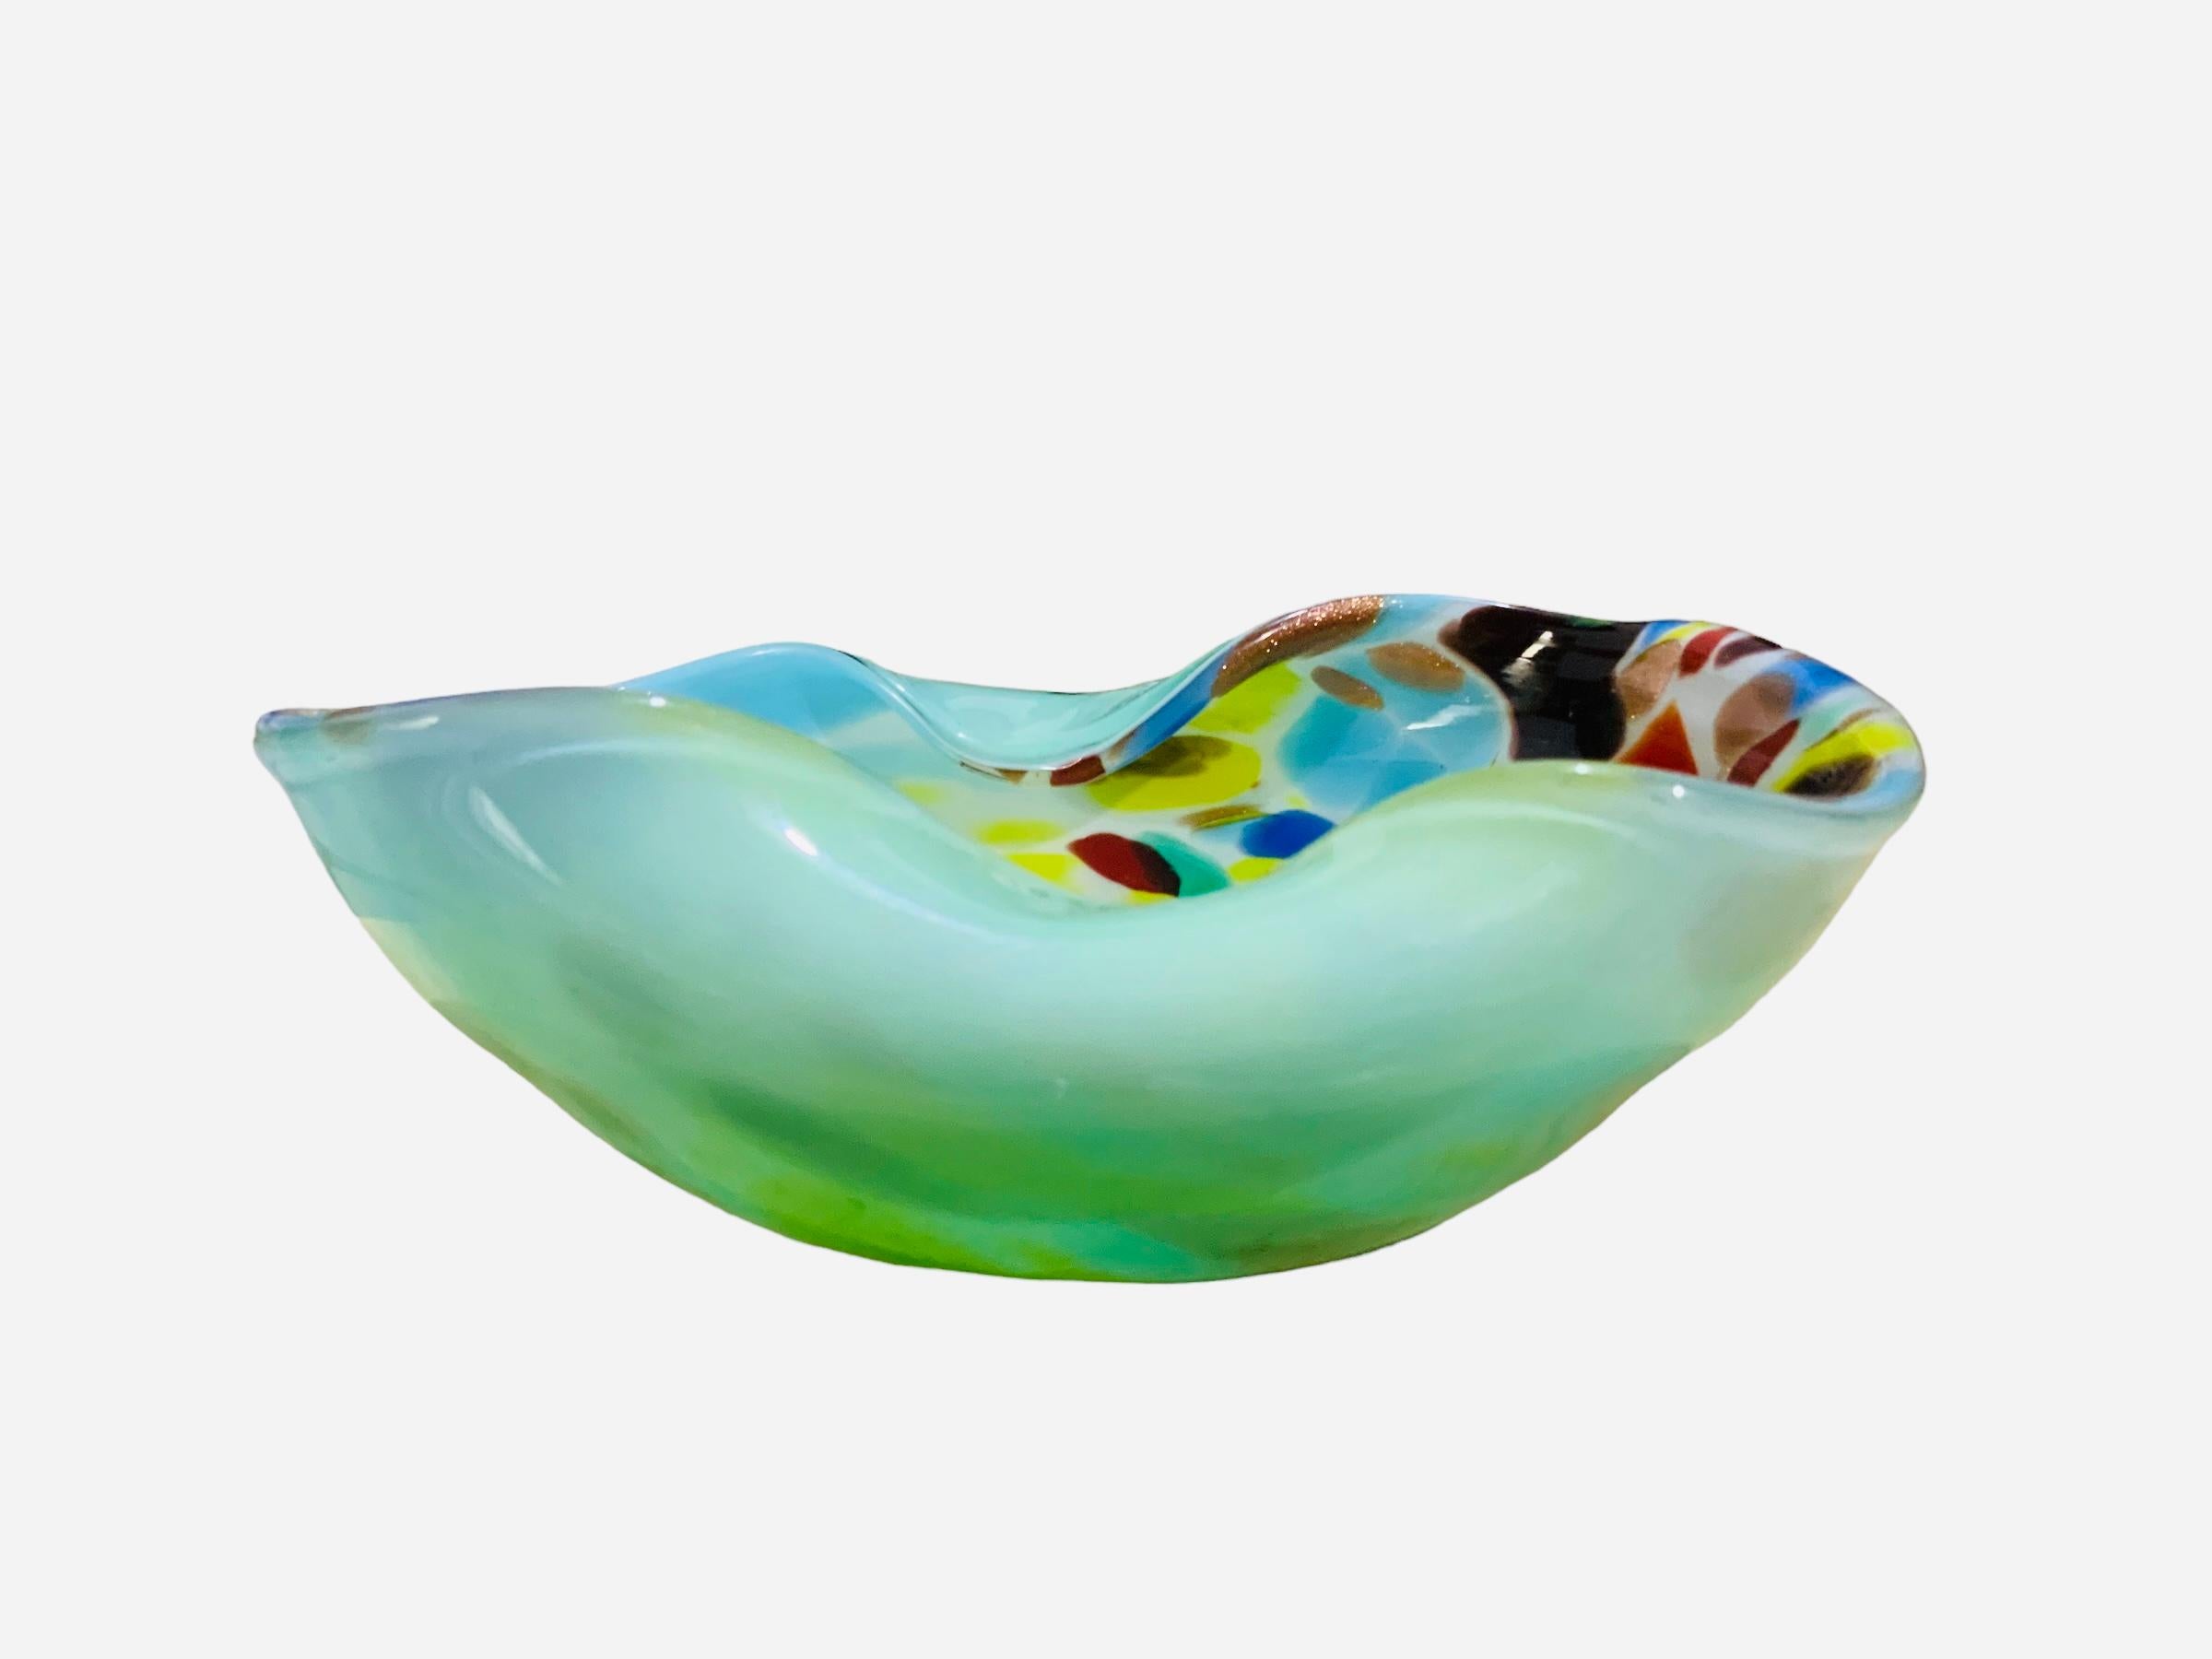 This is a Fratelli Toso Murano Art Glass Confetti ashtray. It depicts a round glass bowl folded in two sides. It is mint green in the back and in the front is very colorful with confetti asymmetrical geometric figures.